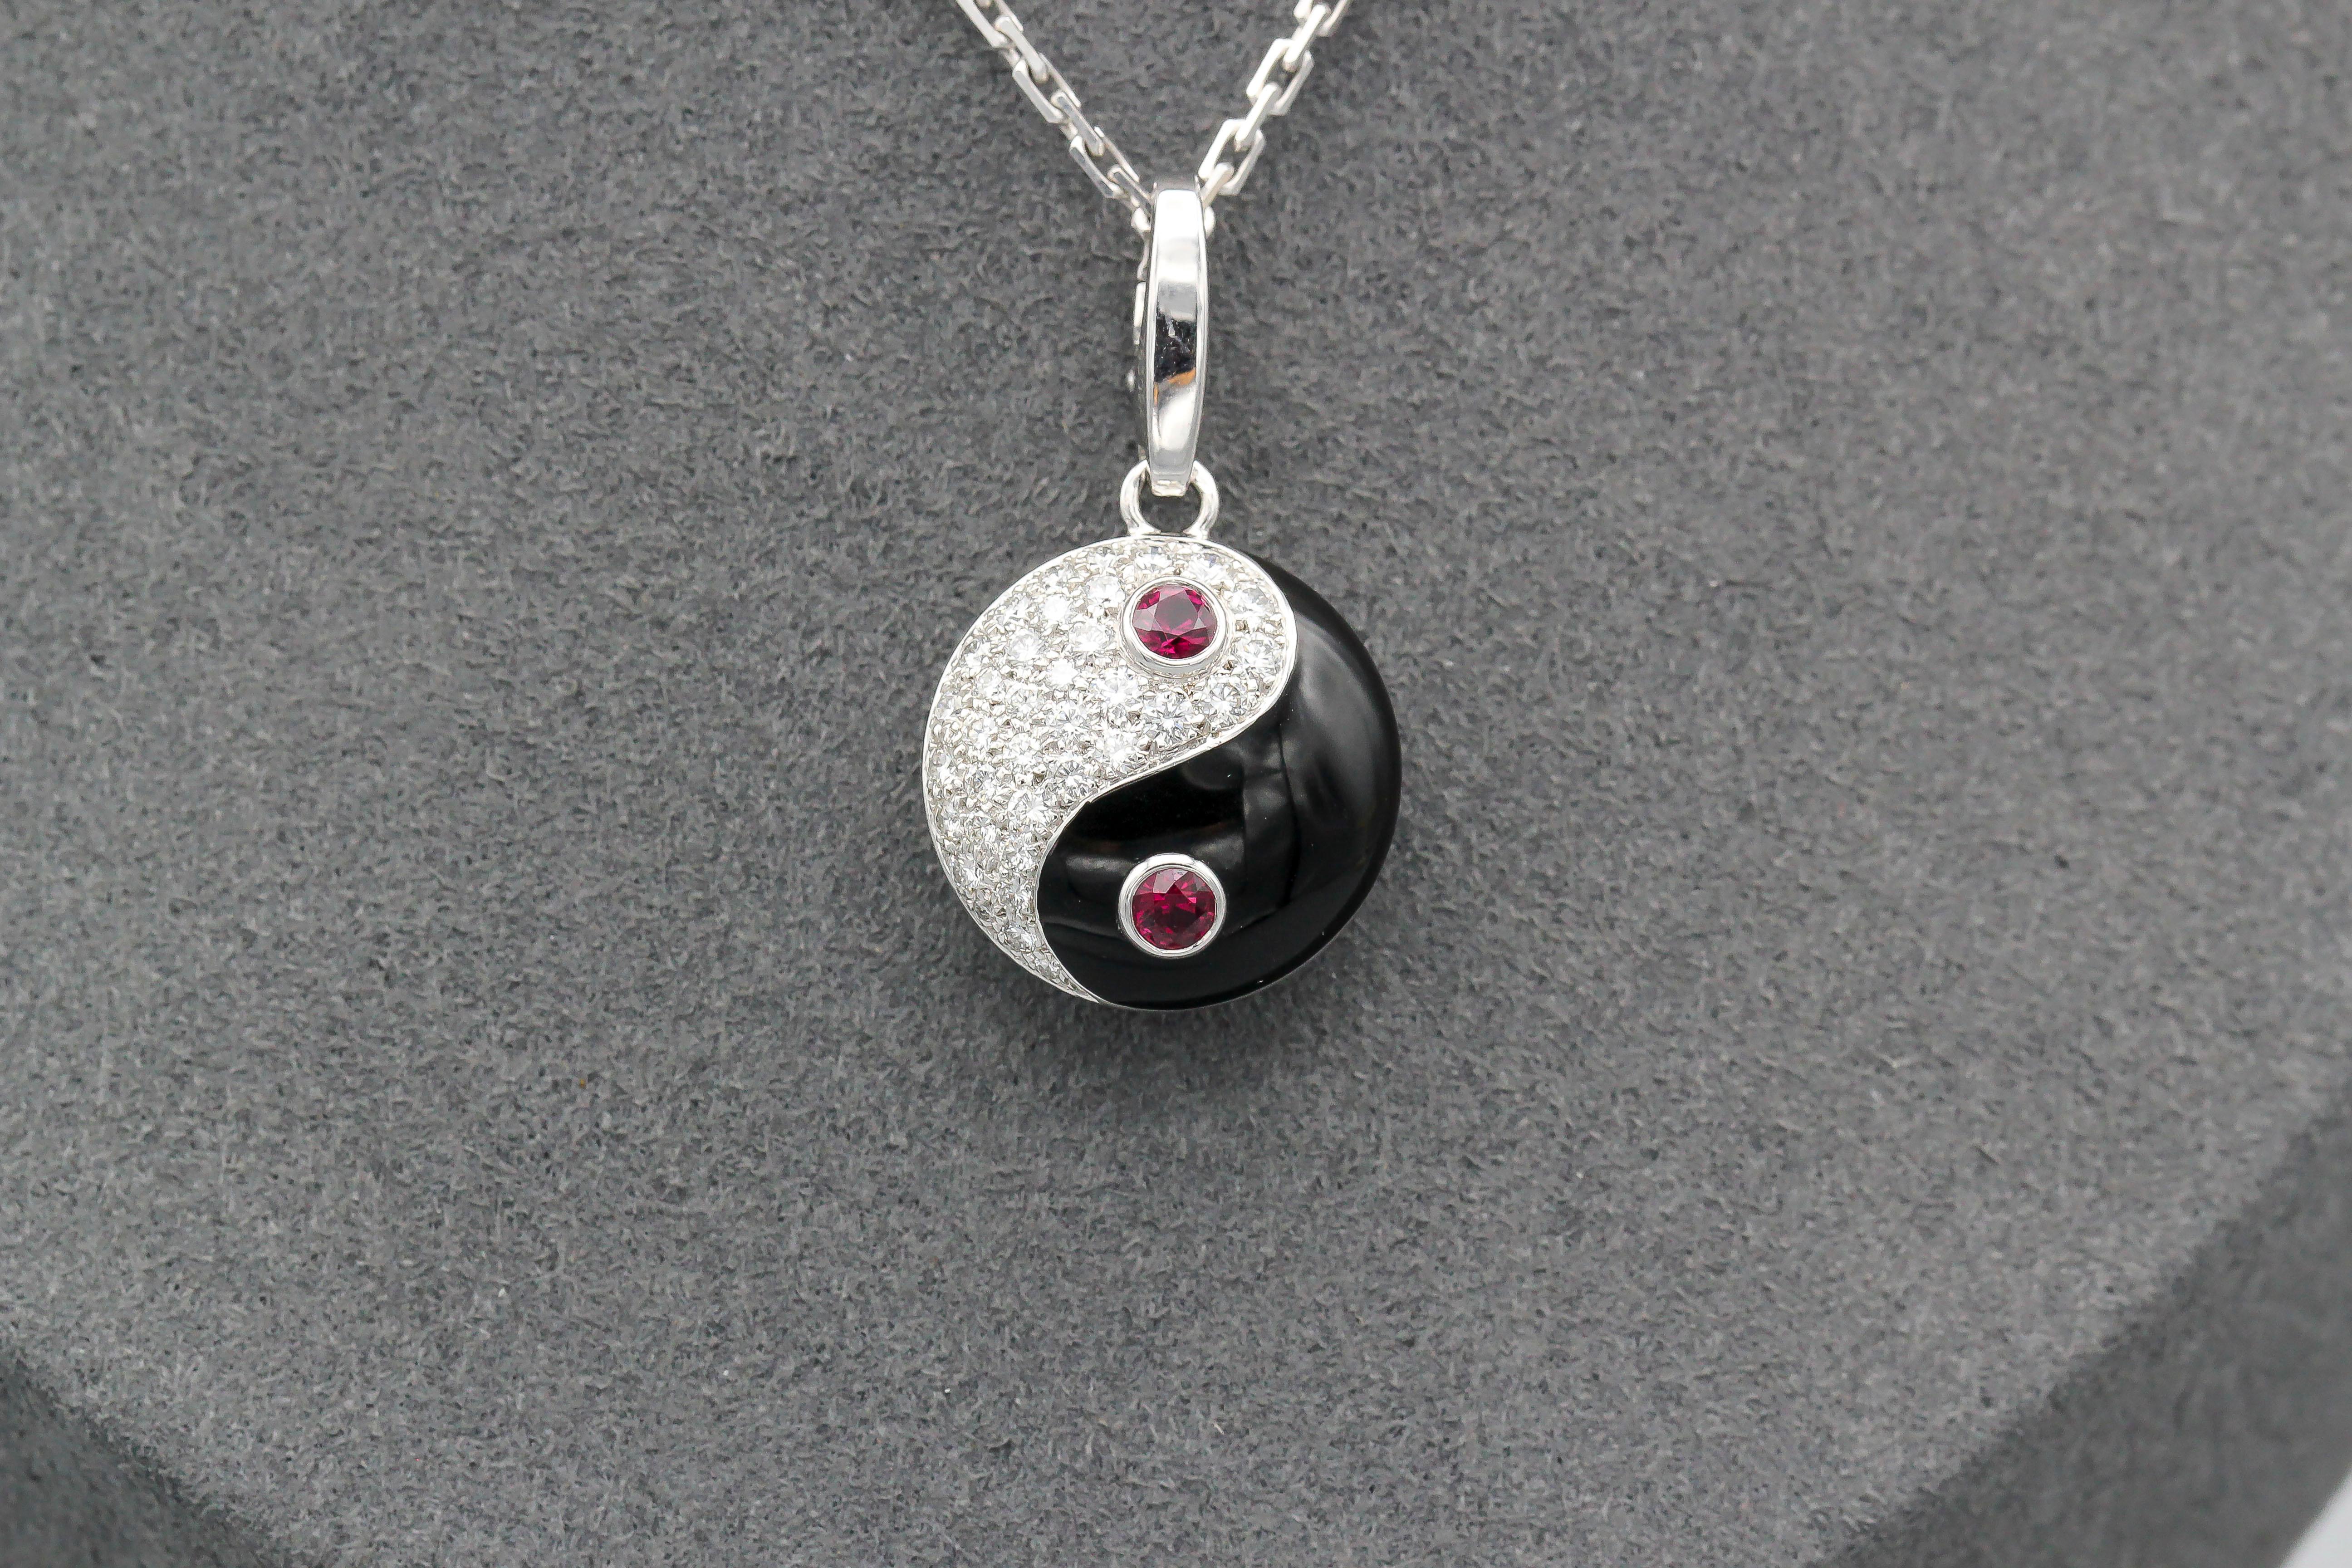 Fine ruby diamond and 18K white gold charm by Cartier. Designed as the Yin Yang sign, it features diamonds and rubies.  Well made and easy to add to any bracelet or pendant.  Chain not included.

Hallmarks: Cartier, 750, reference numbers, French